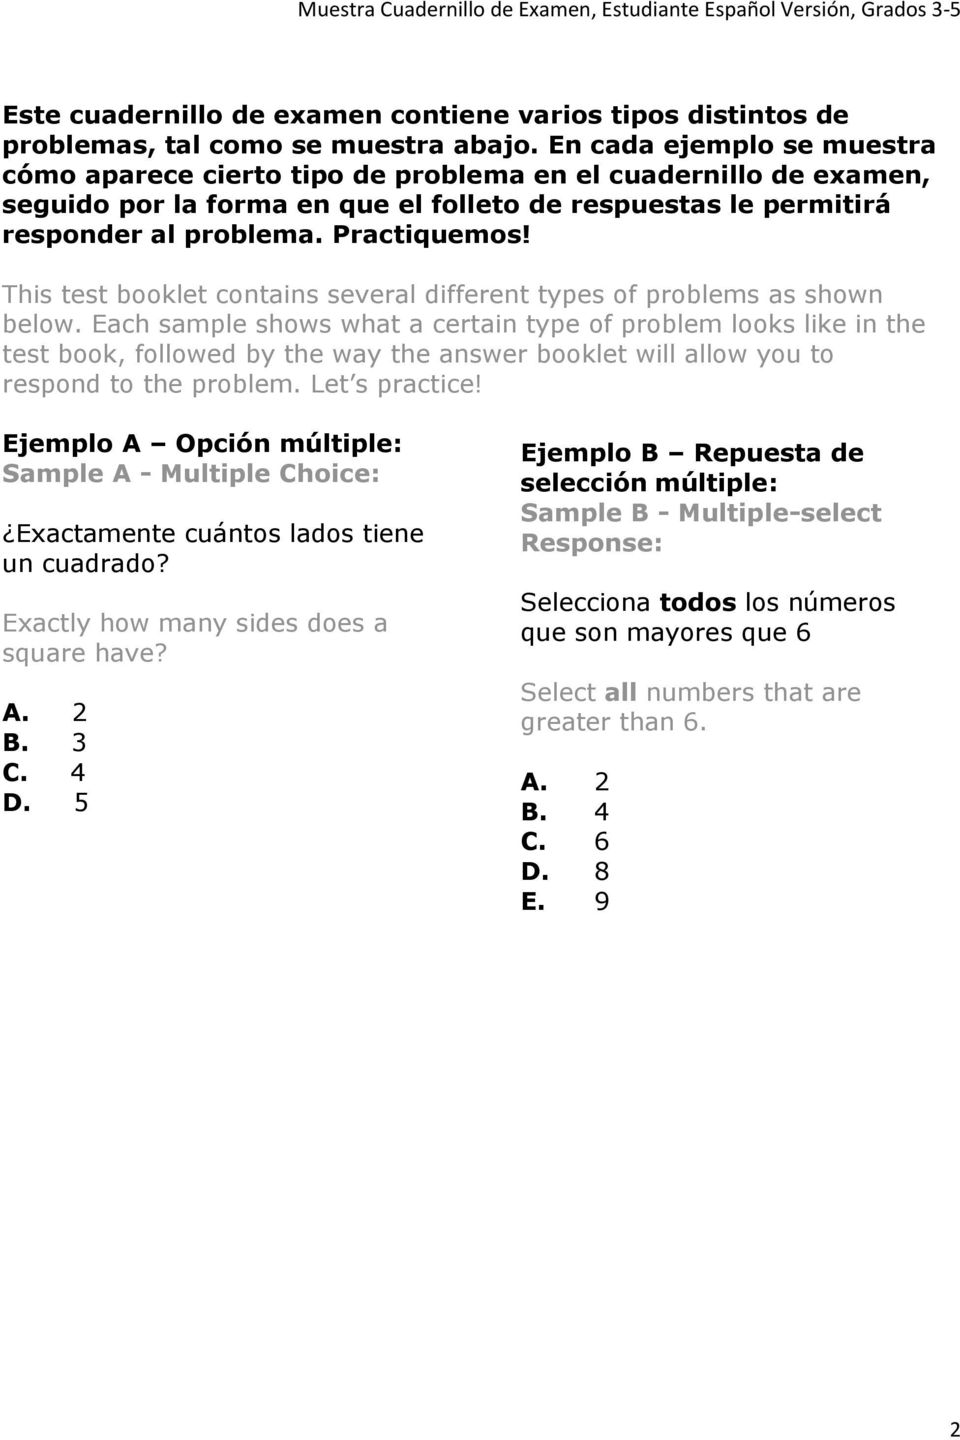 This test booklet contains several different types of problems as shown below.